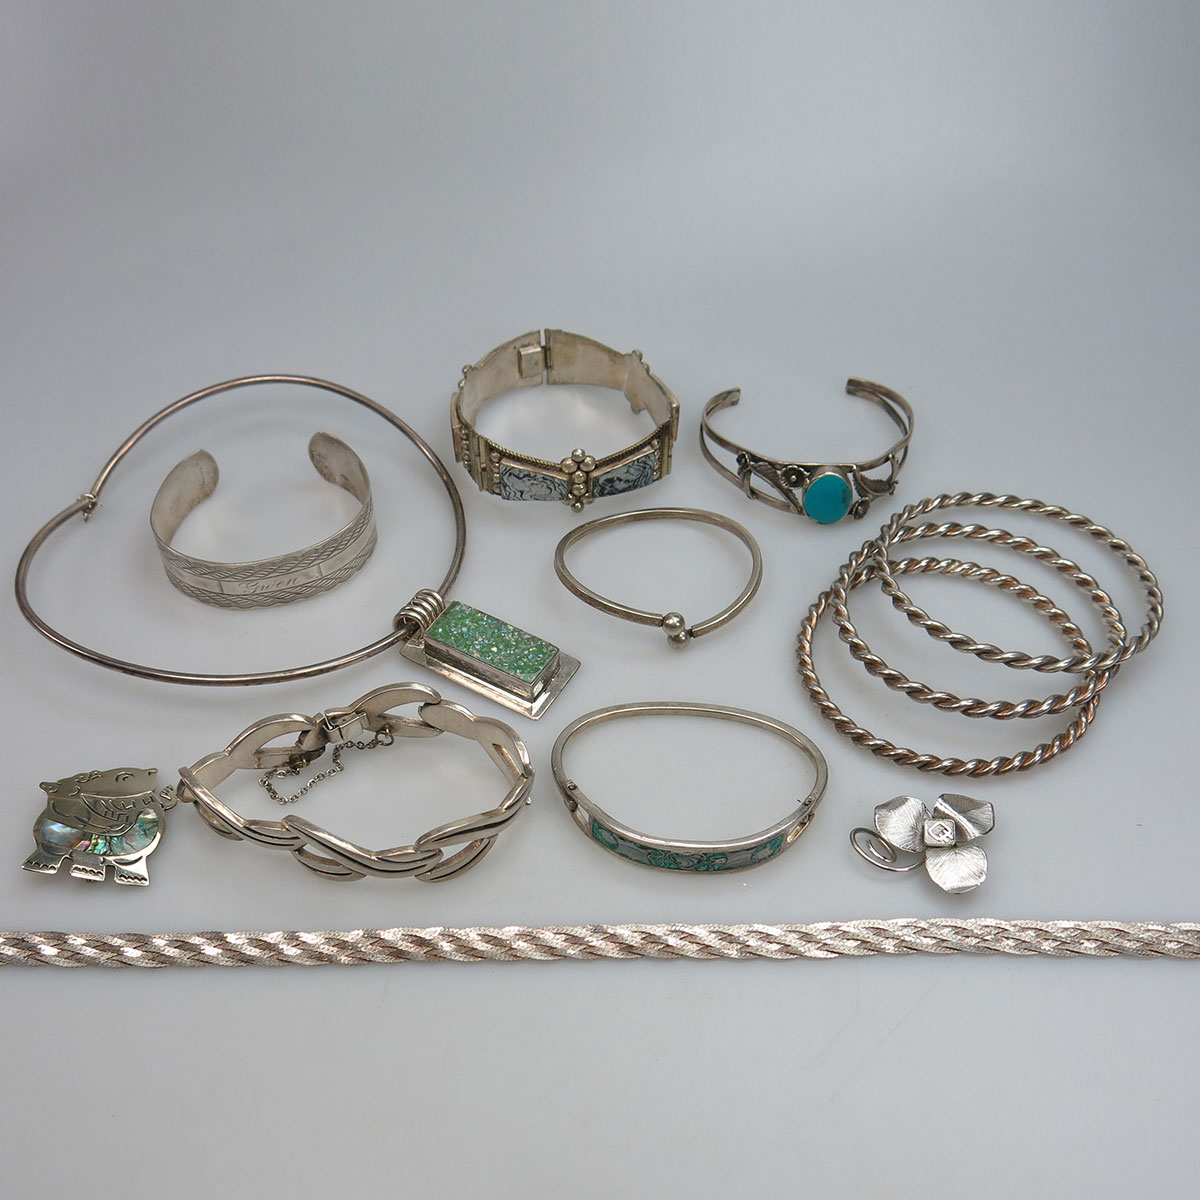 Quantity Of Silver And Silver-Plated Jewellery